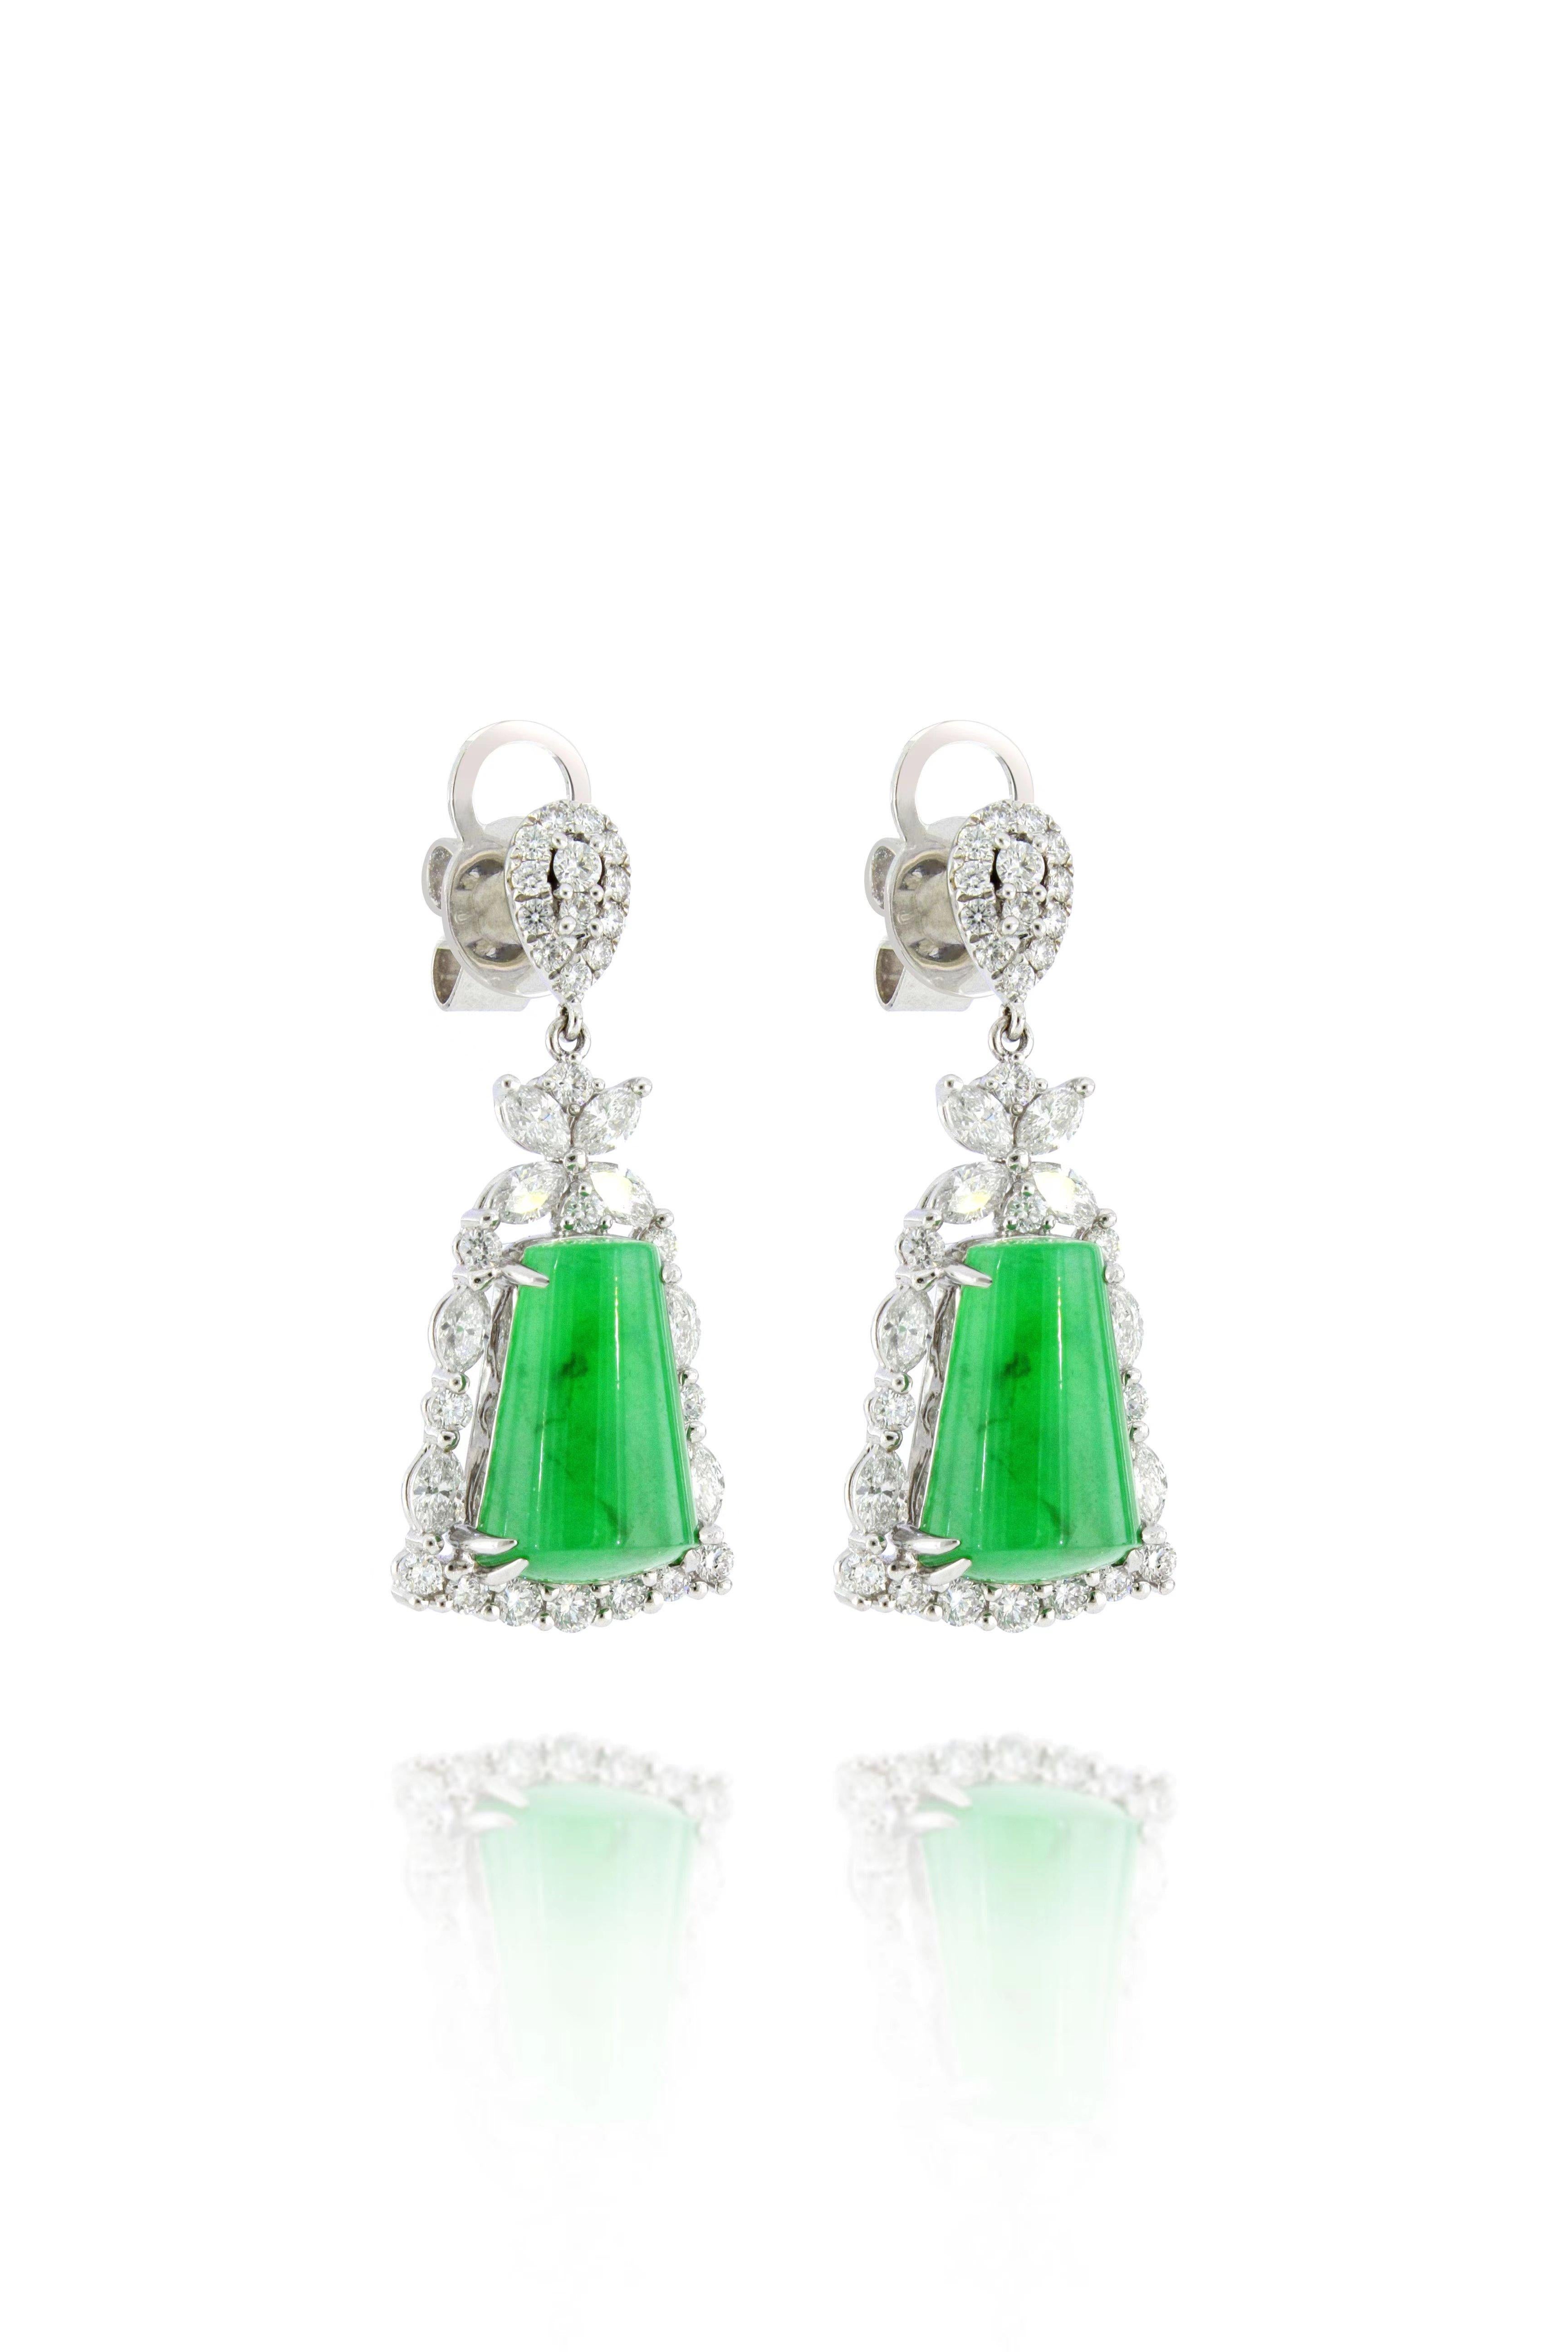 A pair of very fine jadeite and diamond earrings of exceptional translucency, each suspending a natural jadeite jade of brilliant emerald green colour with natural diamonds weighing 1.49 carats, mounted in 18 Karat white gold.  
The company was